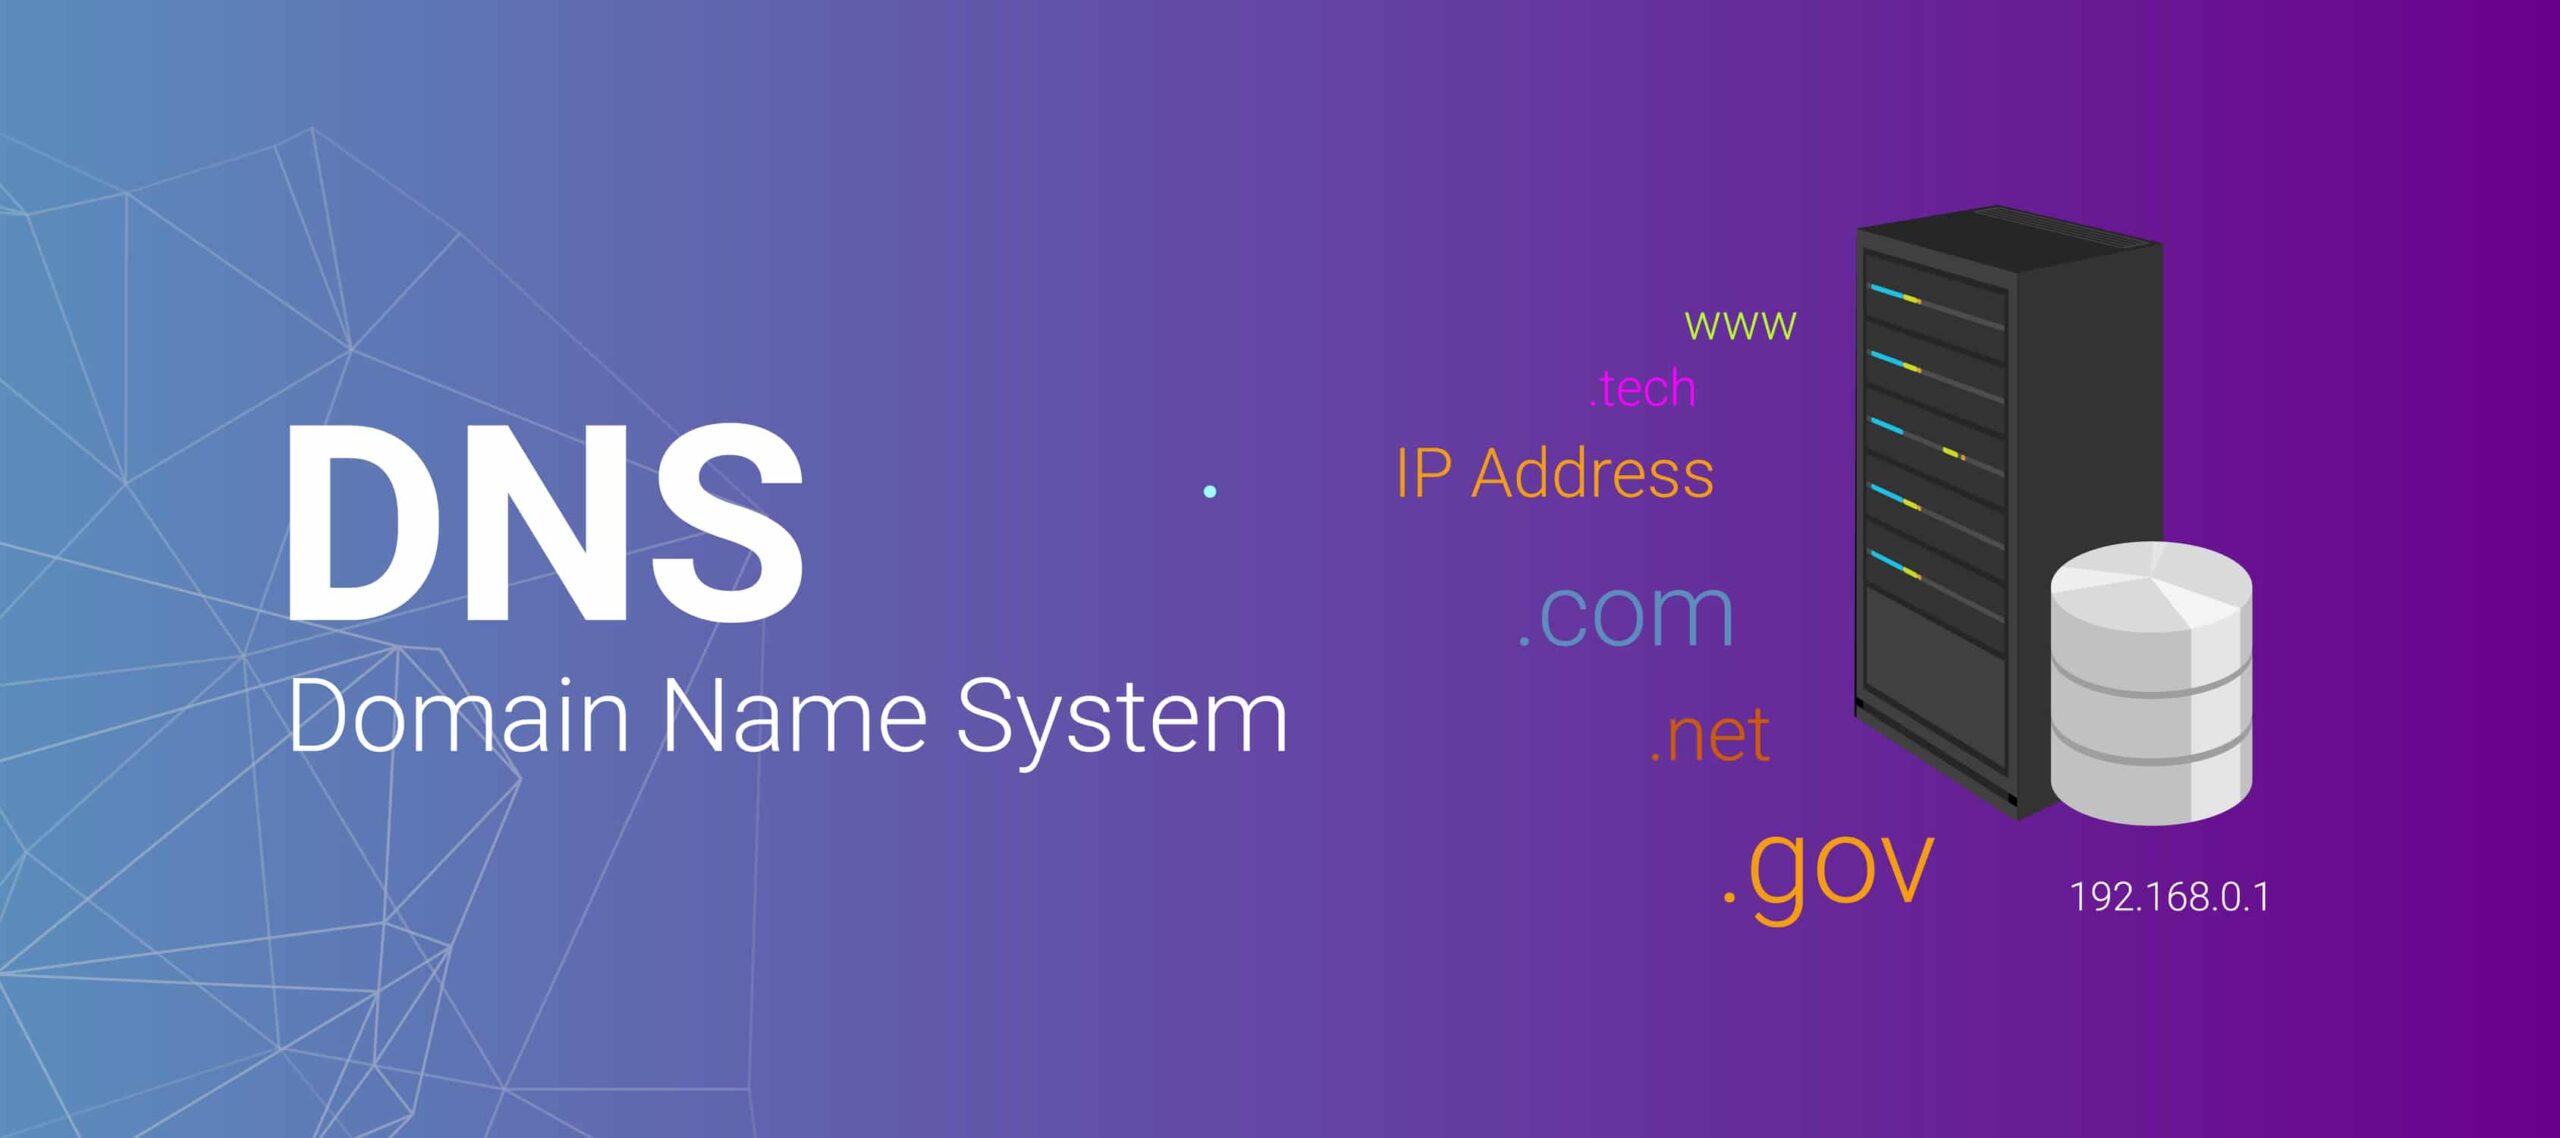 DNS - Domain Name System